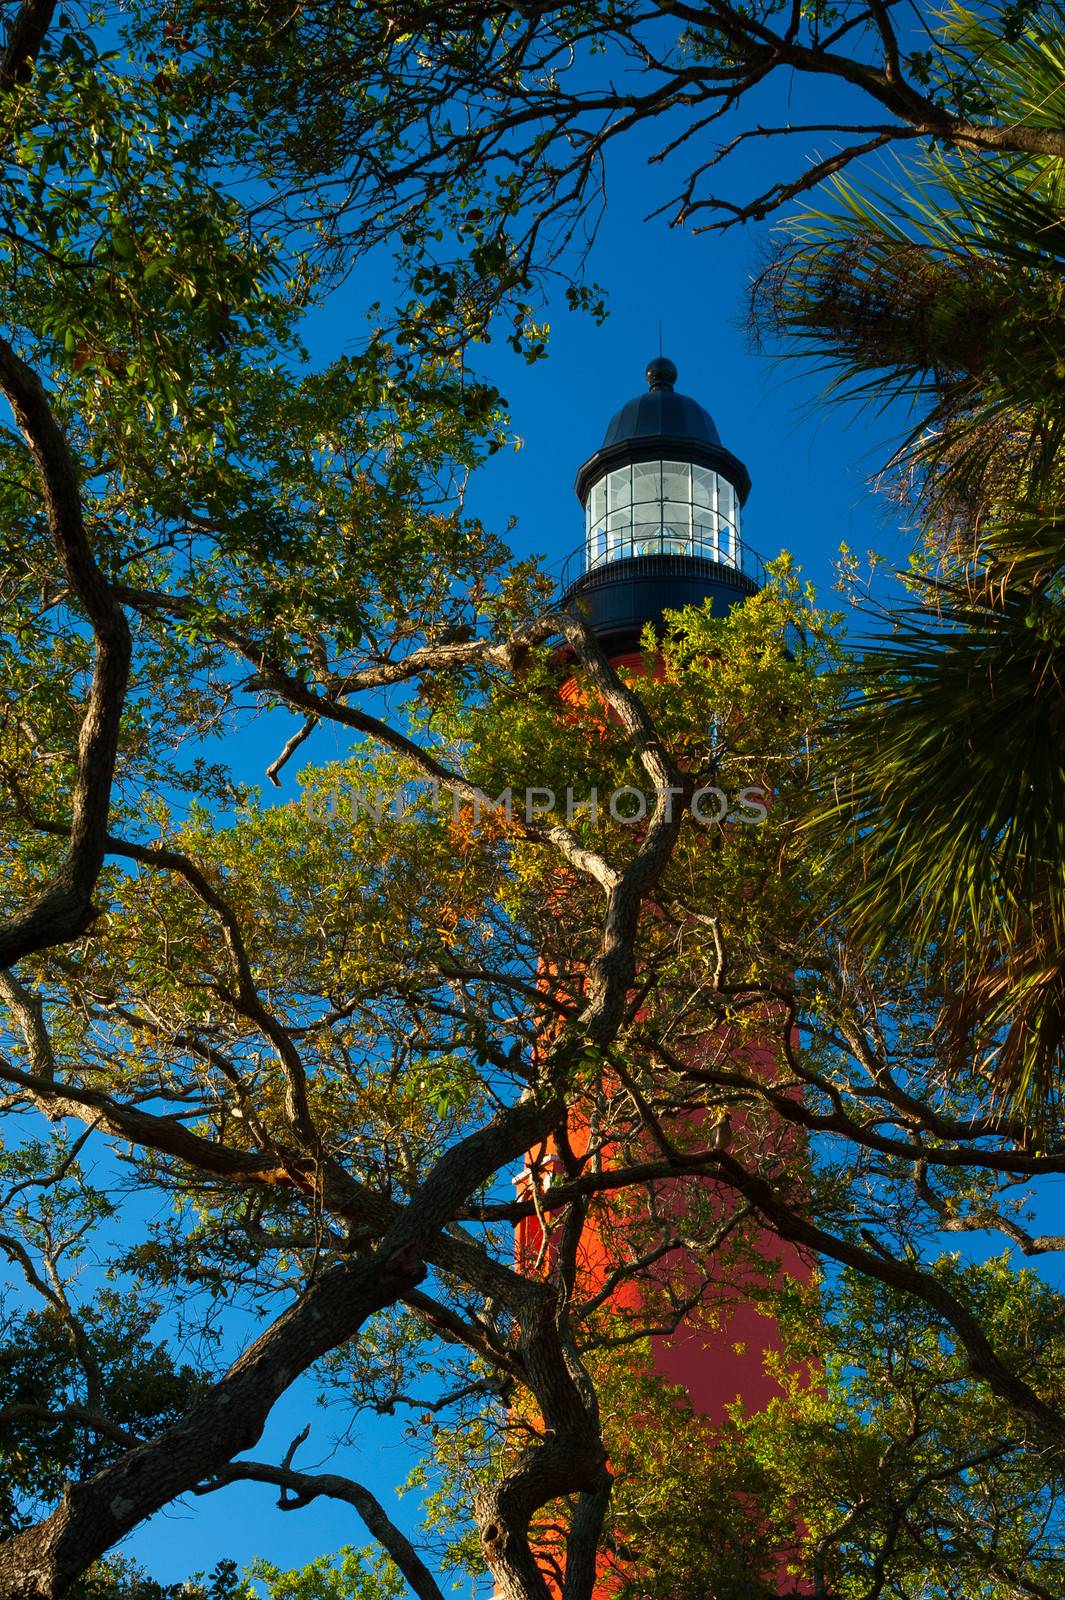 Ponce de Leon Inlet Lighthouse and Museum by CelsoDiniz